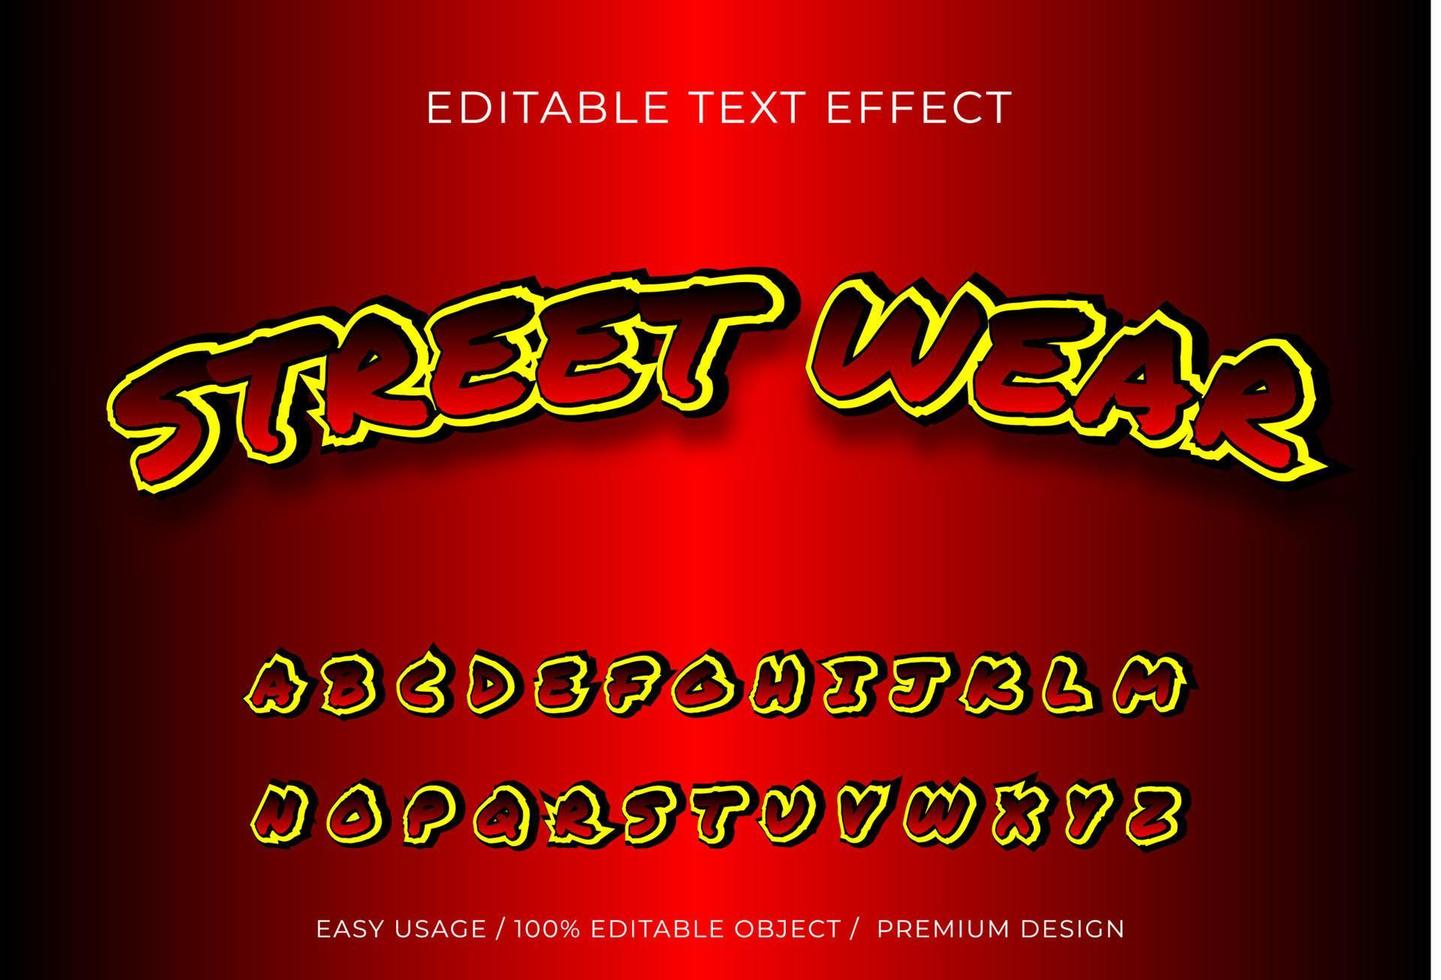 street wear text effect on graphic style vector